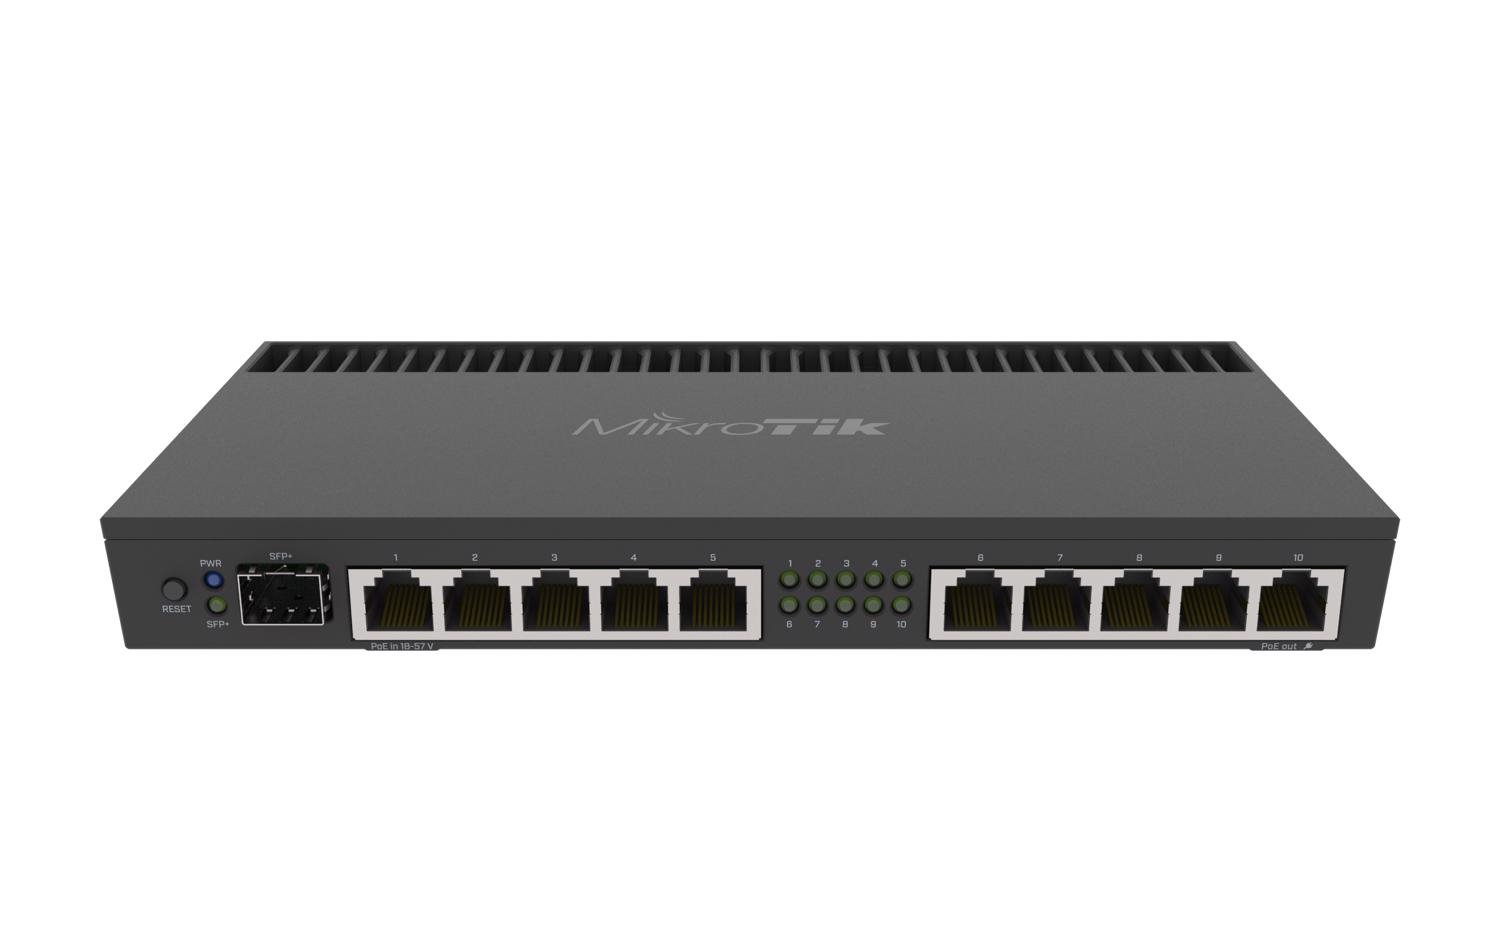 MikroTik RB4011iGS+RM Powerful 10xGigabit port router with a Quad-core; 1.4Ghz CPU, 1GB RAM, SFP+ 10Gbps cage and desktop case with rack ears